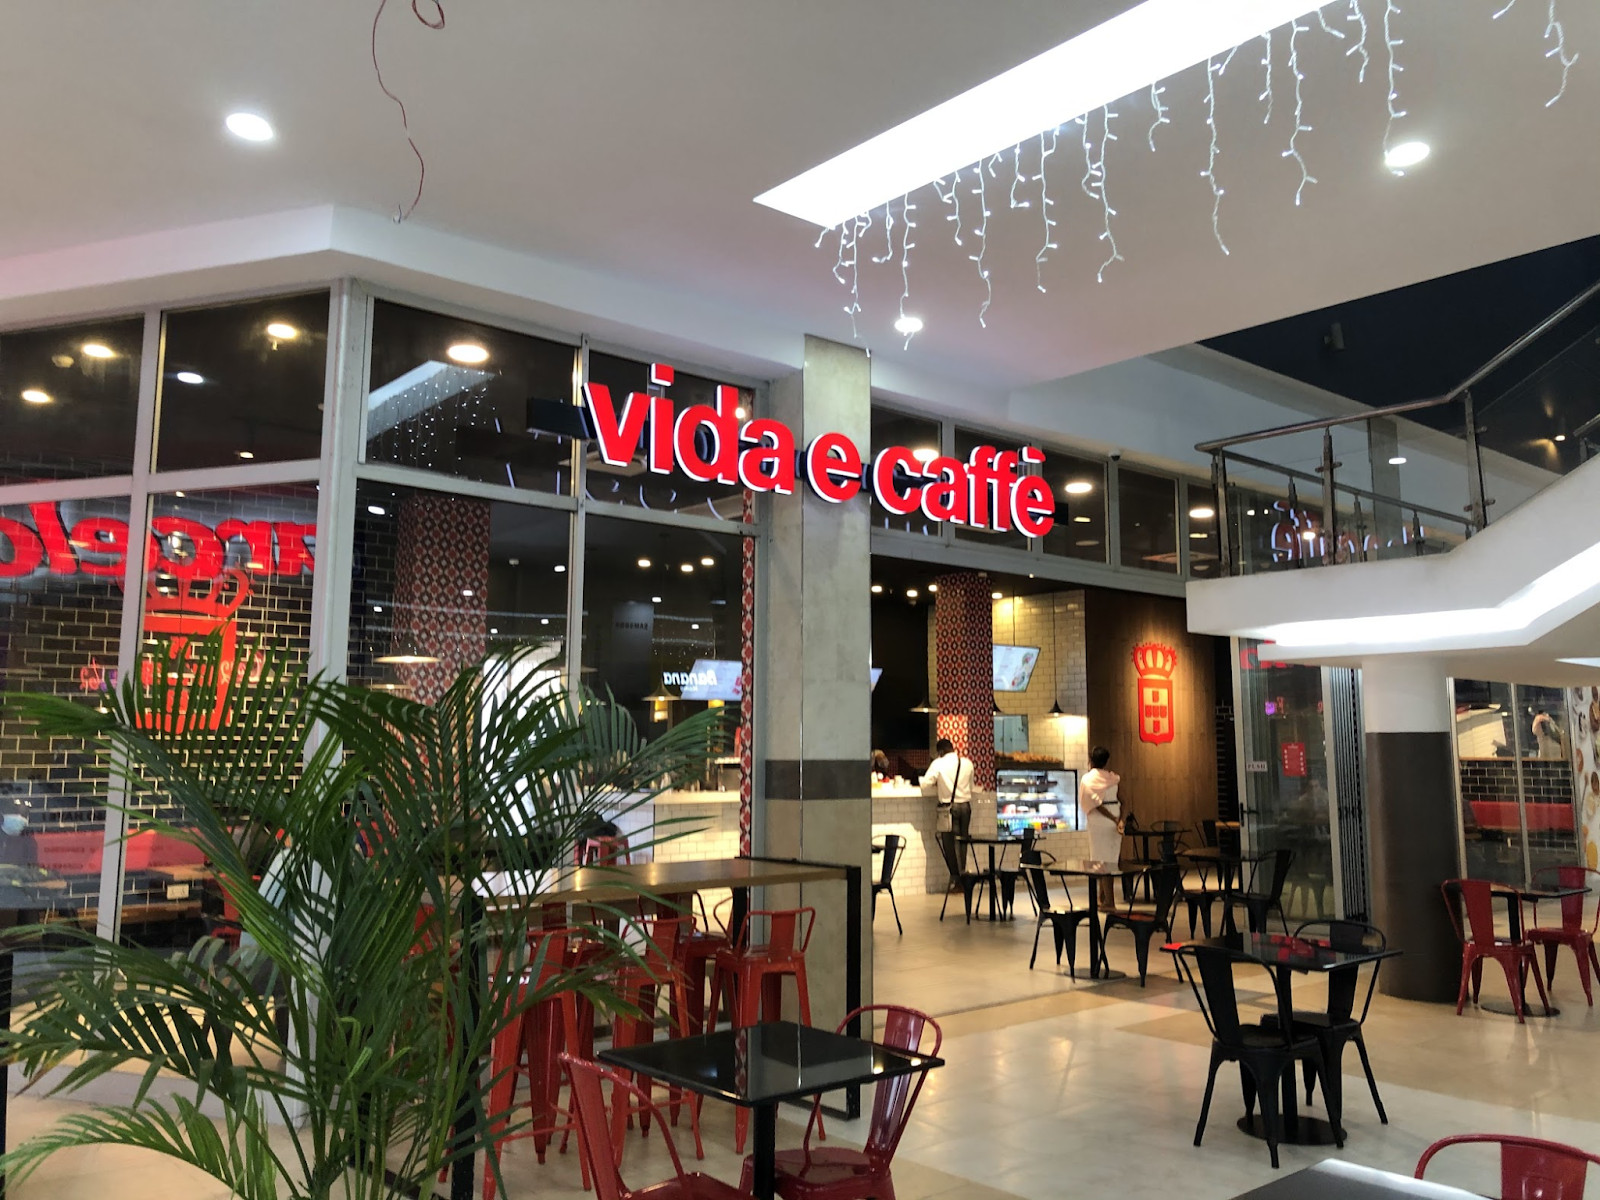 Vida e Cafe , the best cafe shops in Accra